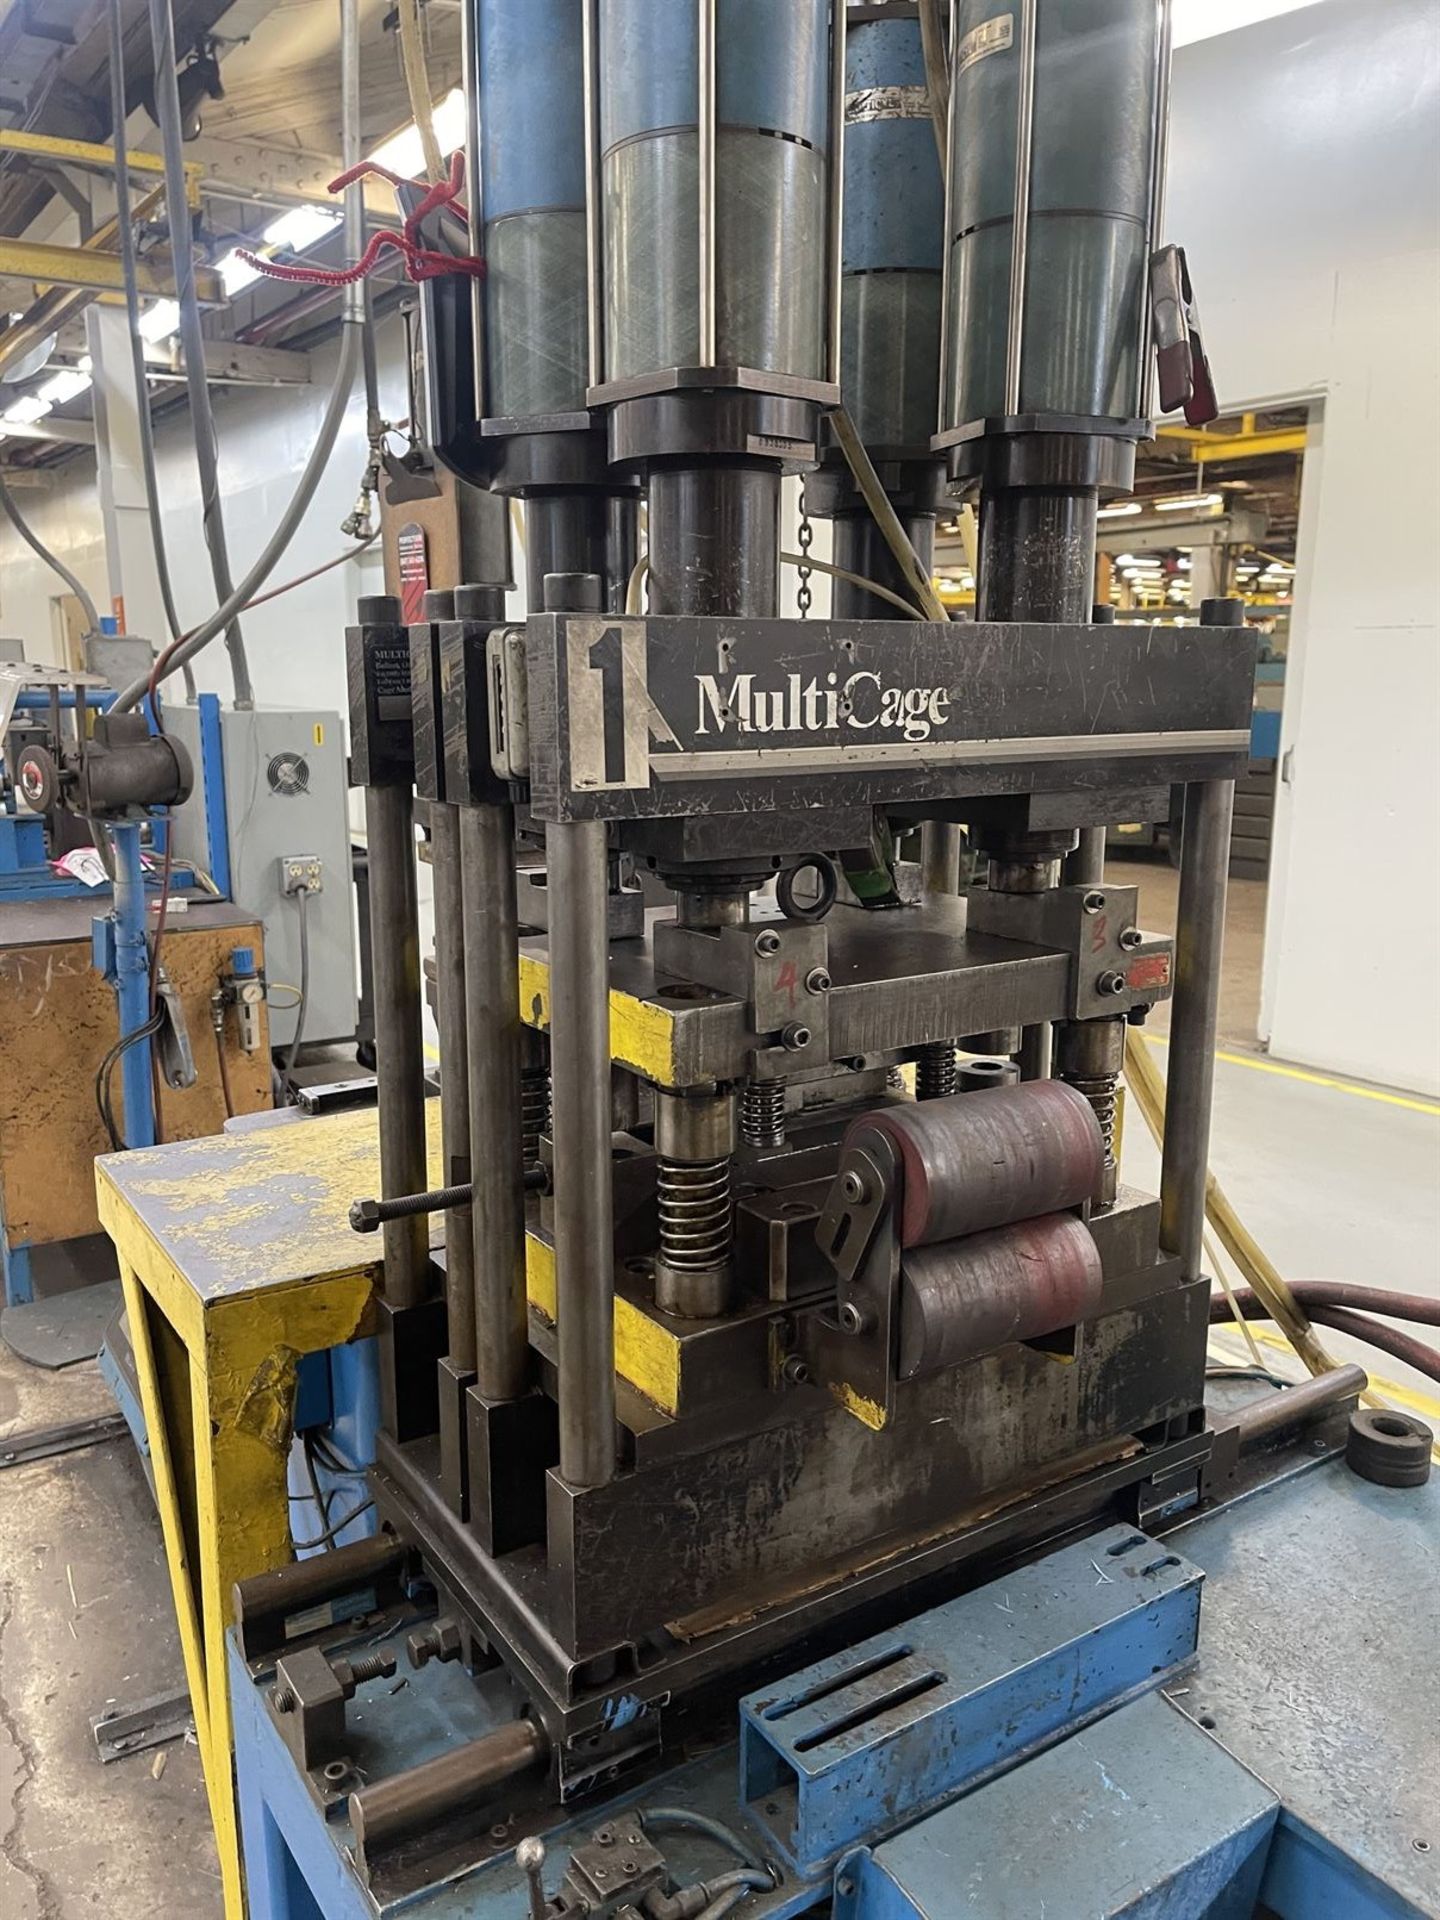 BUTT WELD Prep Line Including Uncoiler, MultiCage Press, Multicycle Press, Roller, and Recoiler, PLC - Image 3 of 6